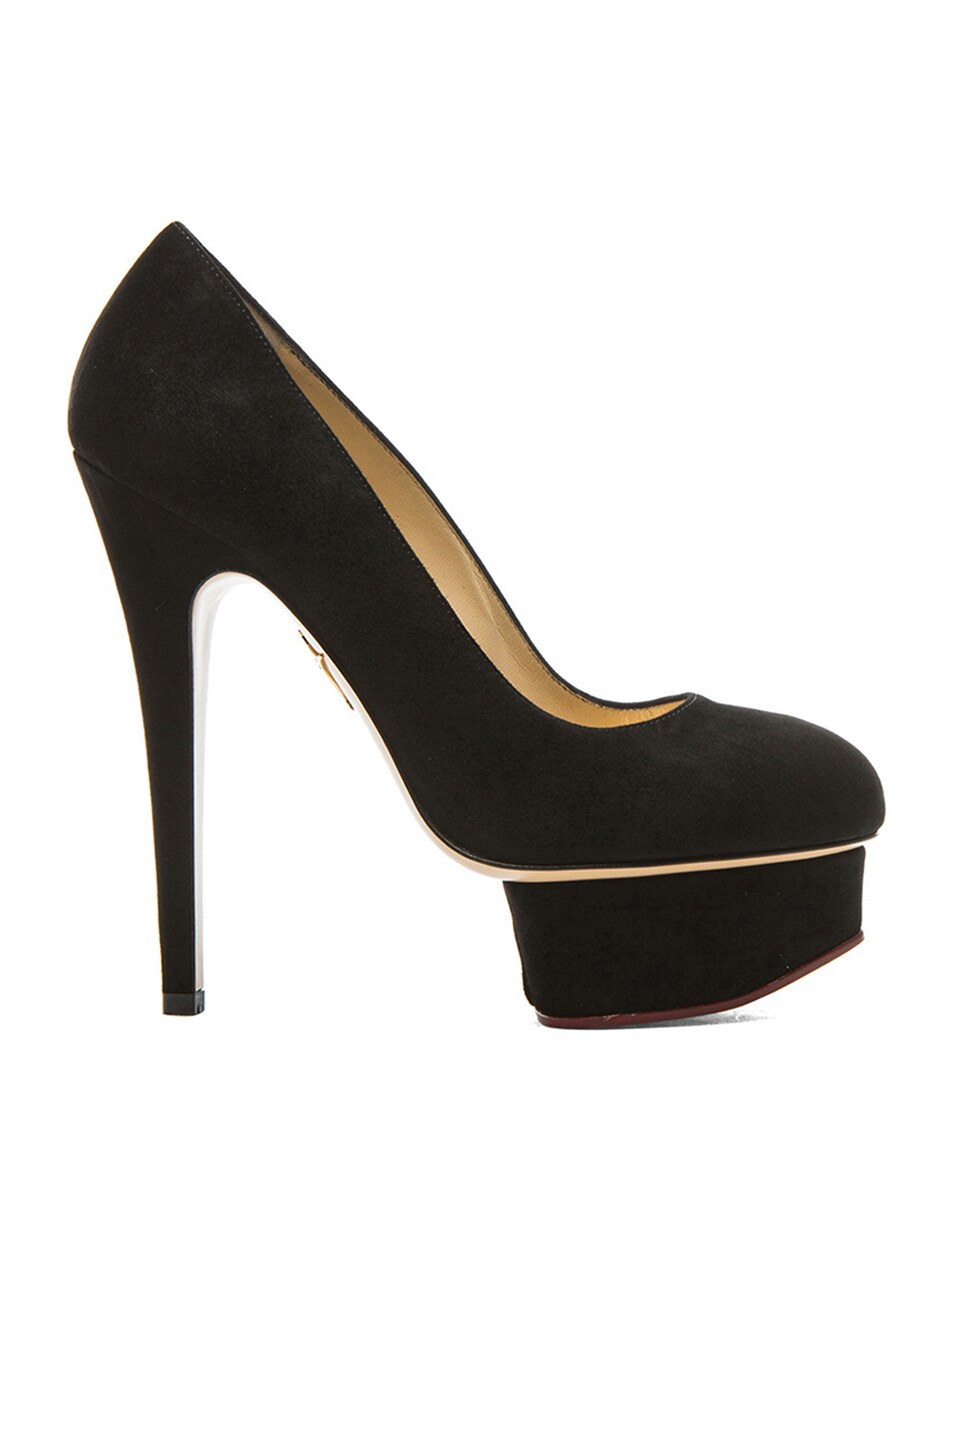 Image 1 of Charlotte Olympia Dolly Suede Pumps in Black